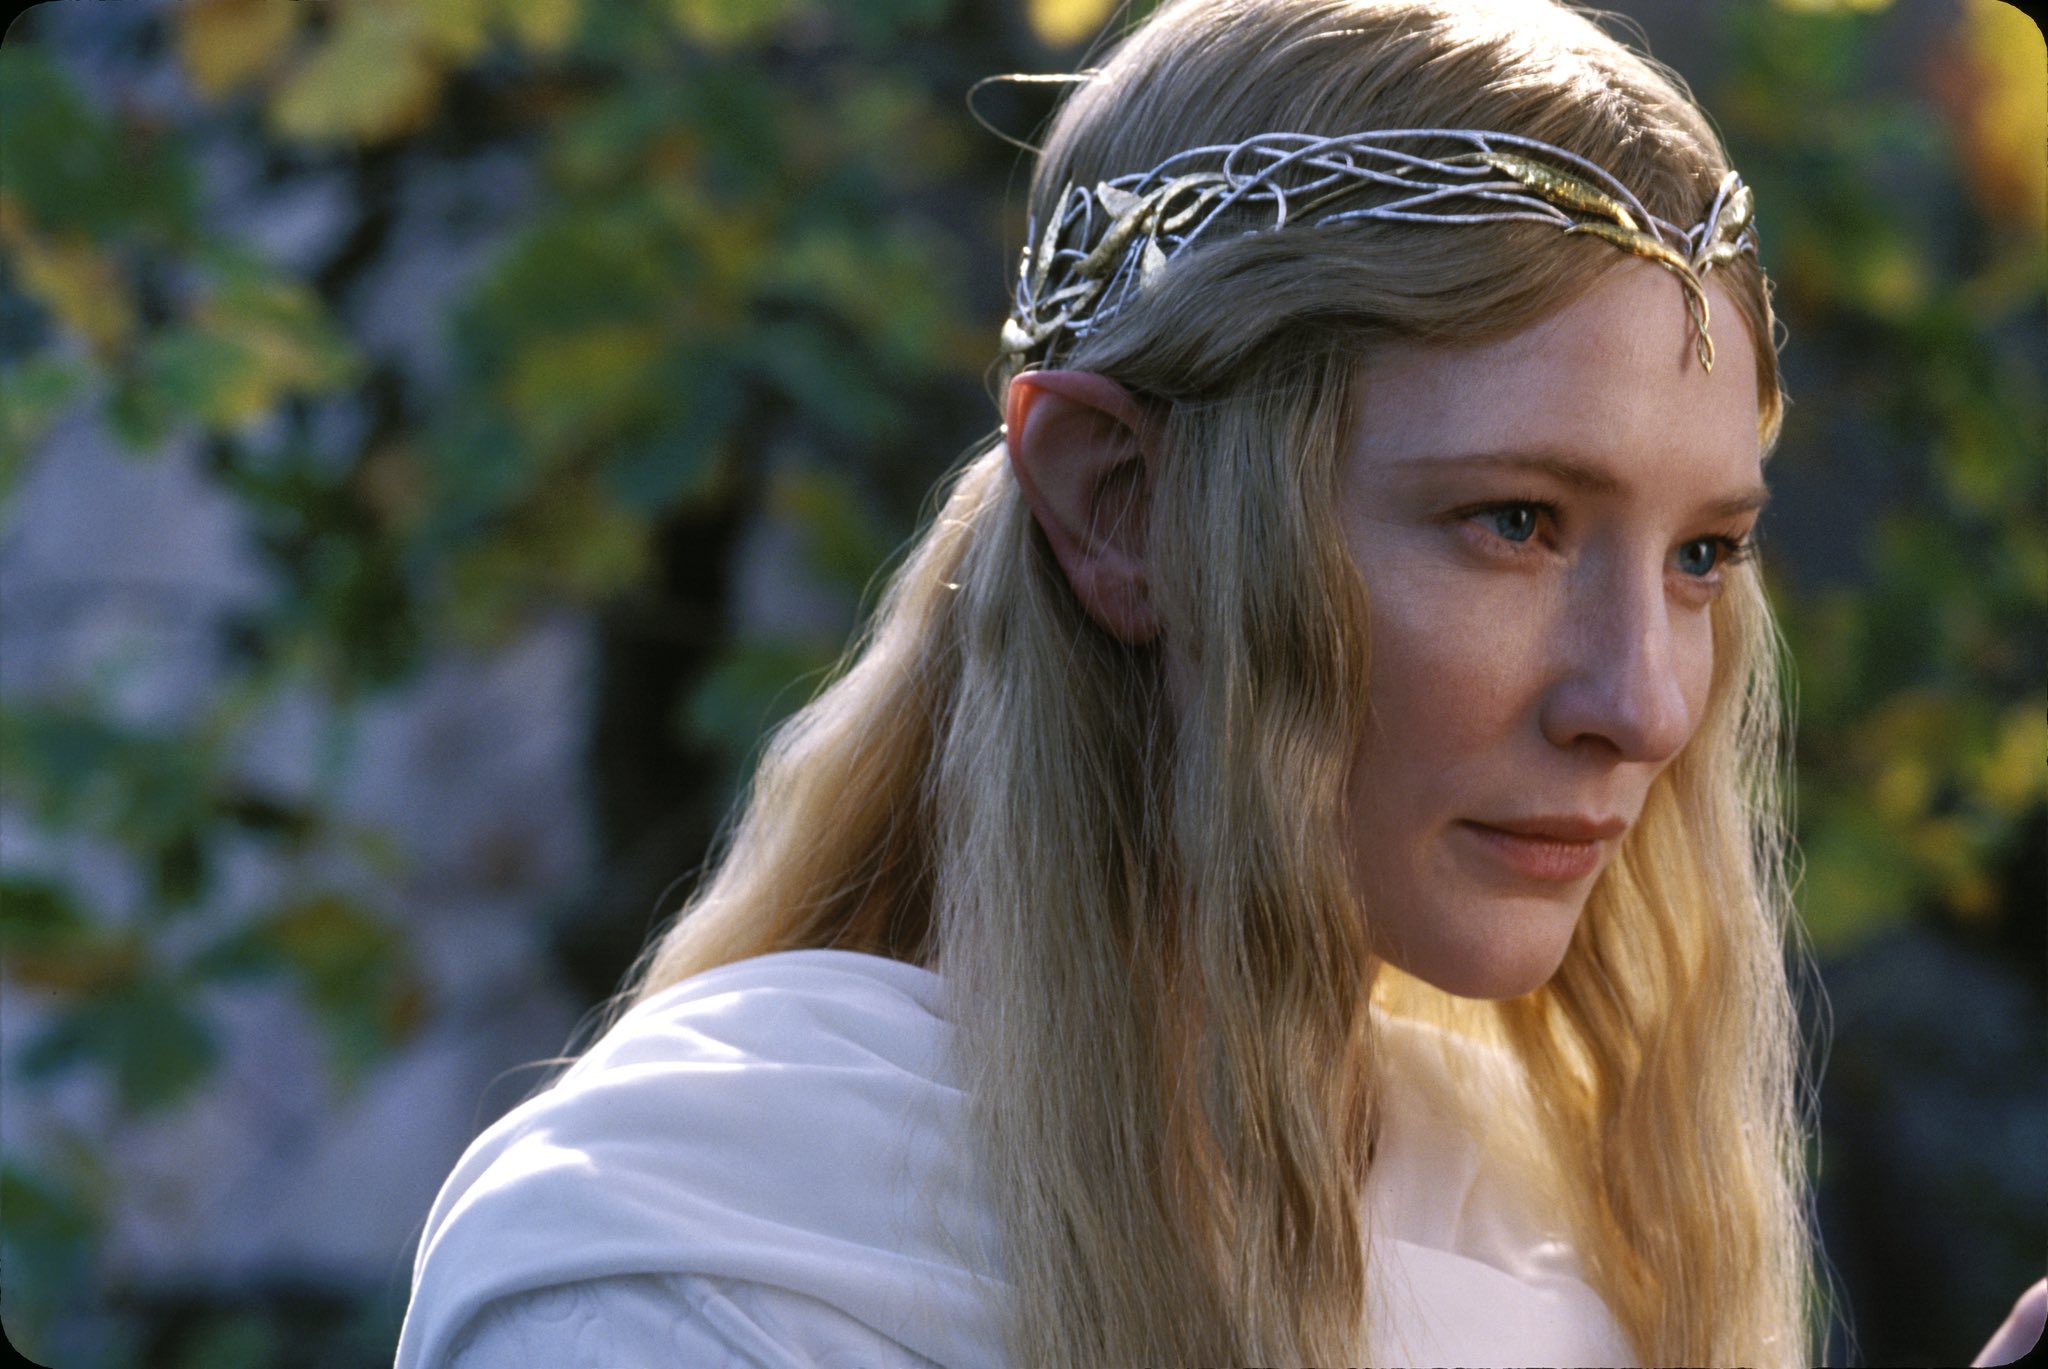 Wishing our Galadriel, Cate Blanchett a very Happy Birthday!  